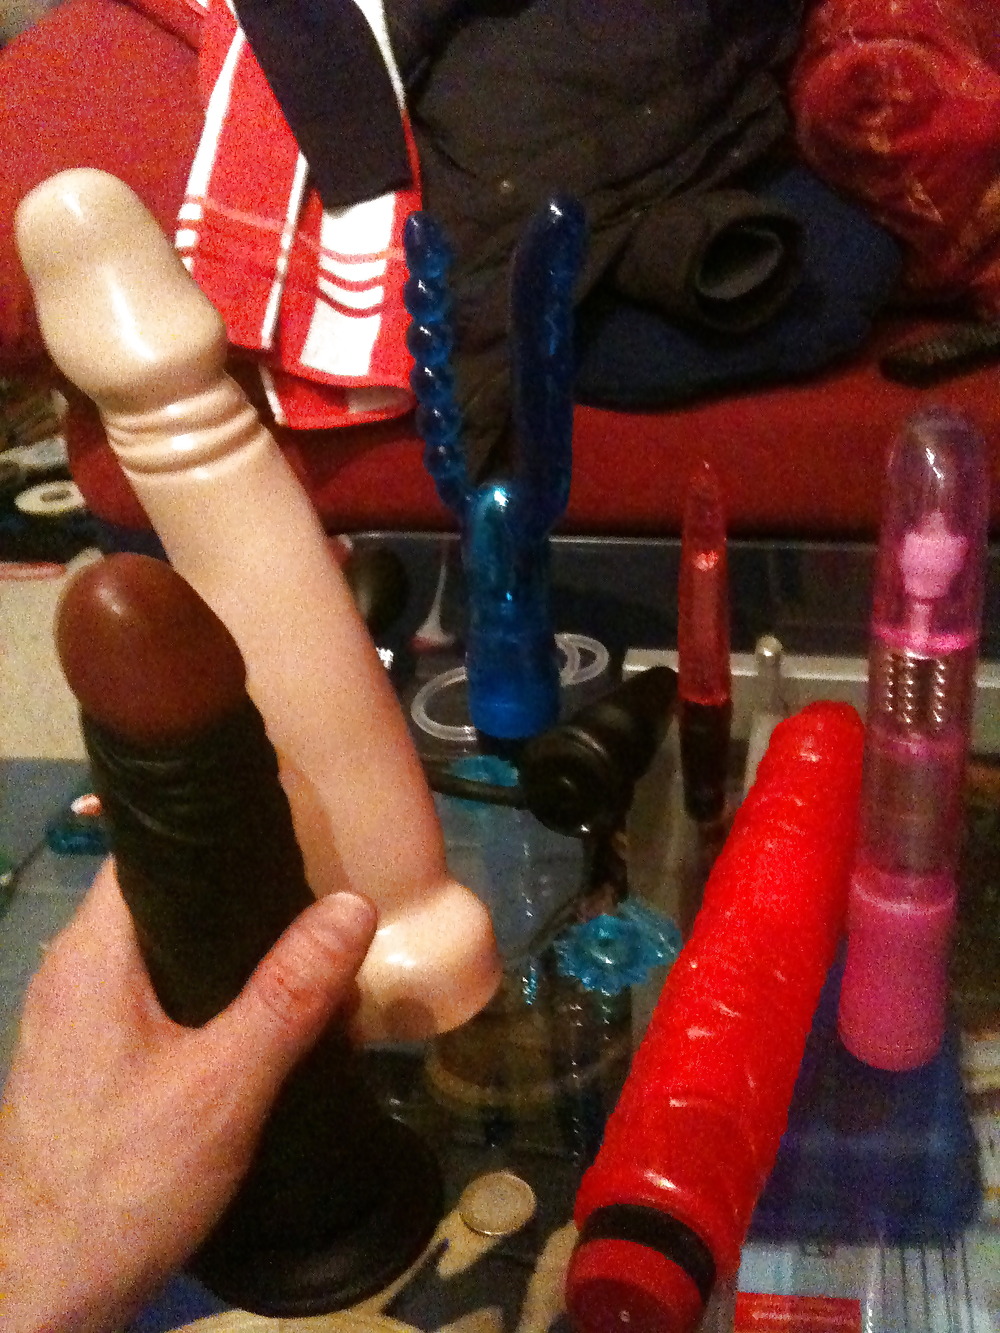 My toys for you